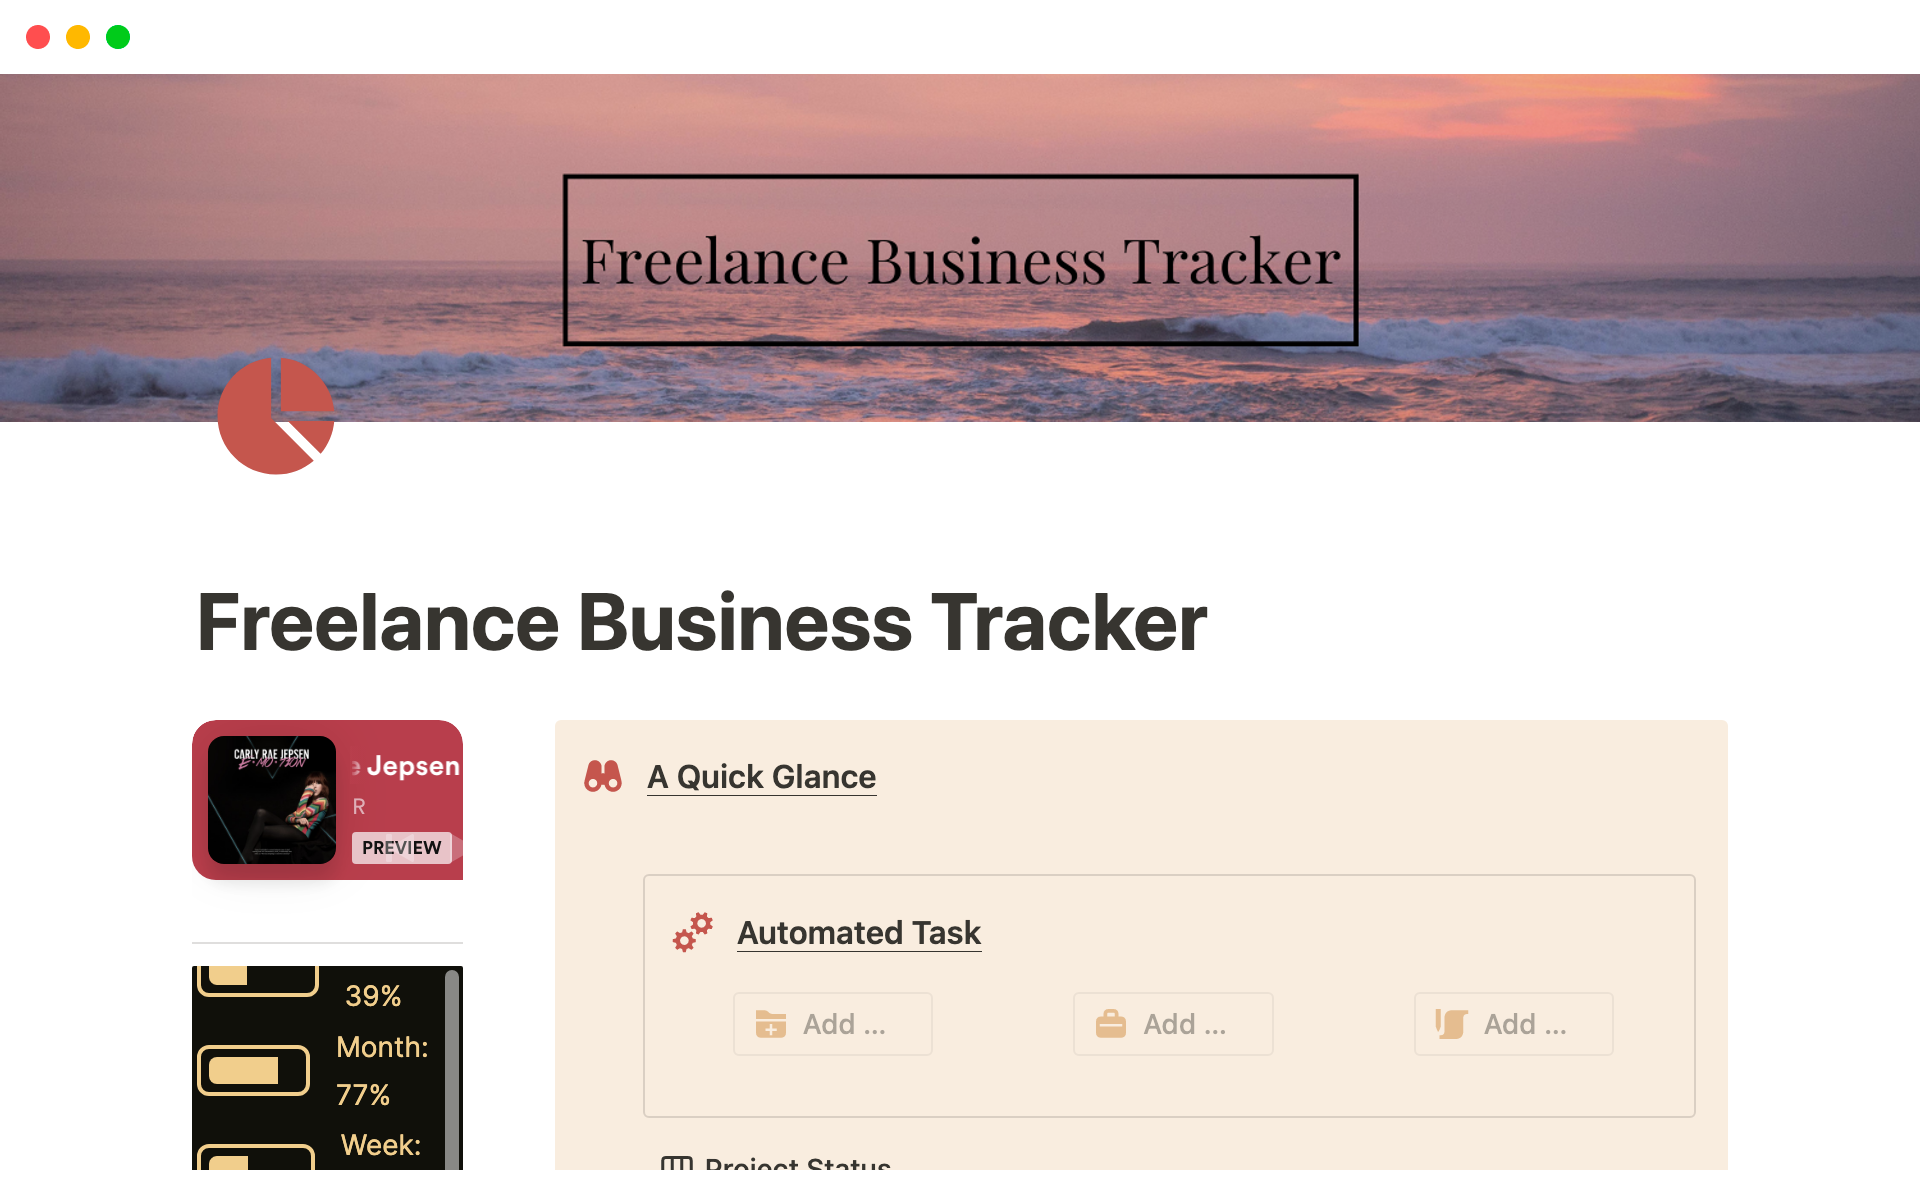 It is useful for freelancers to track all their projects, clients and invoices from a single platform.